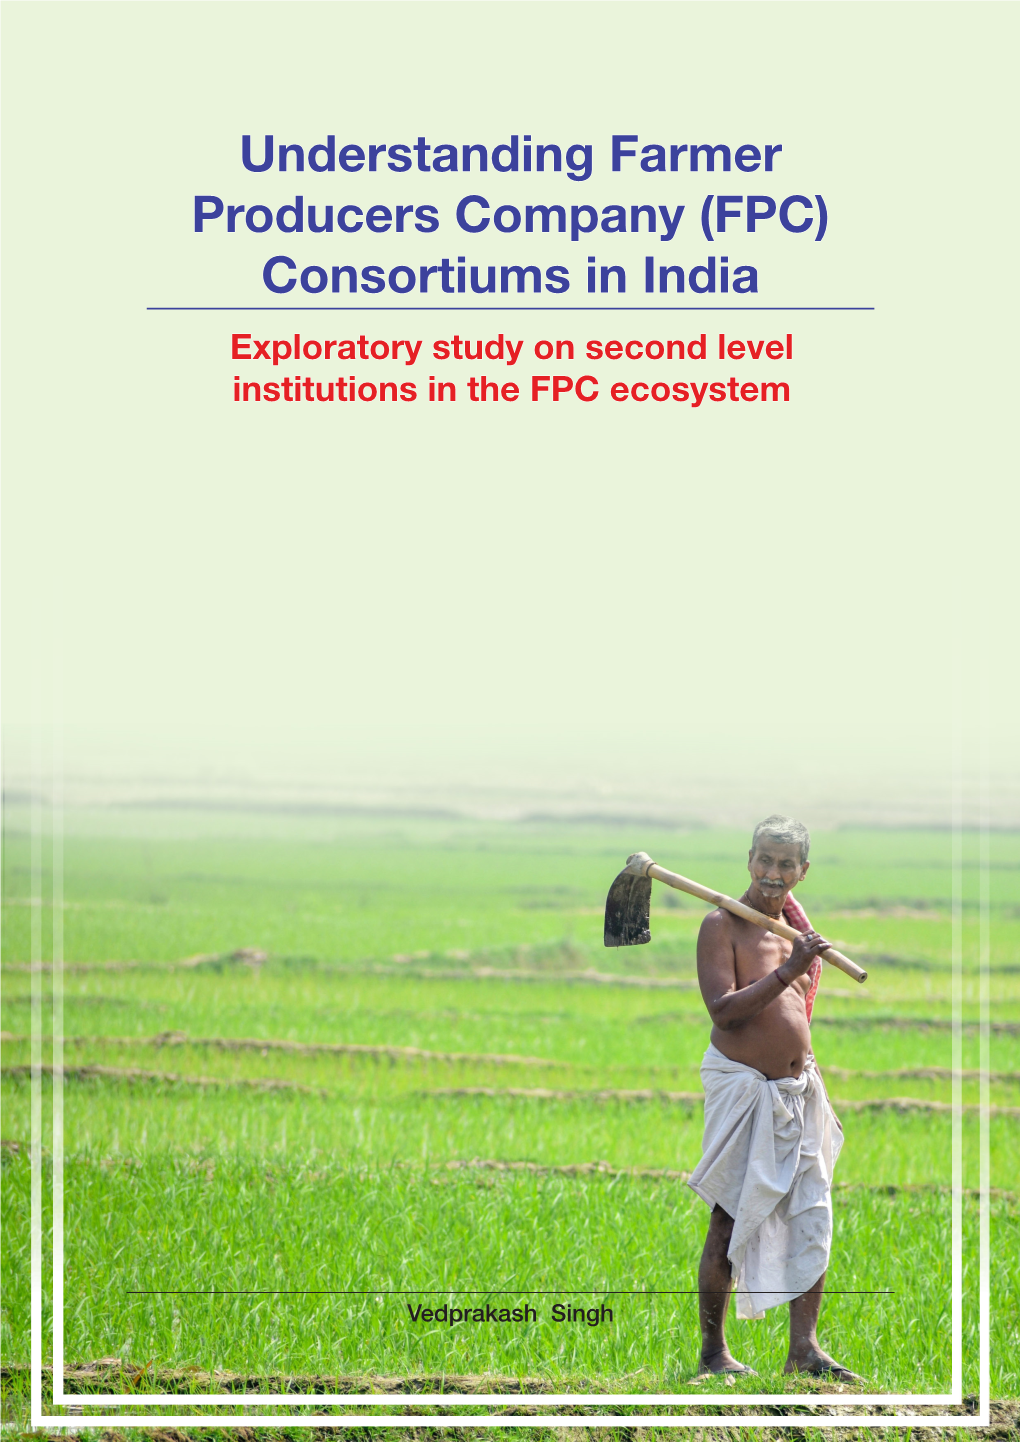 Understanding Farmer Producers Company (FPC) Consortiums in India Exploratory Study on Second Level Institutions in the FPC Ecosystem